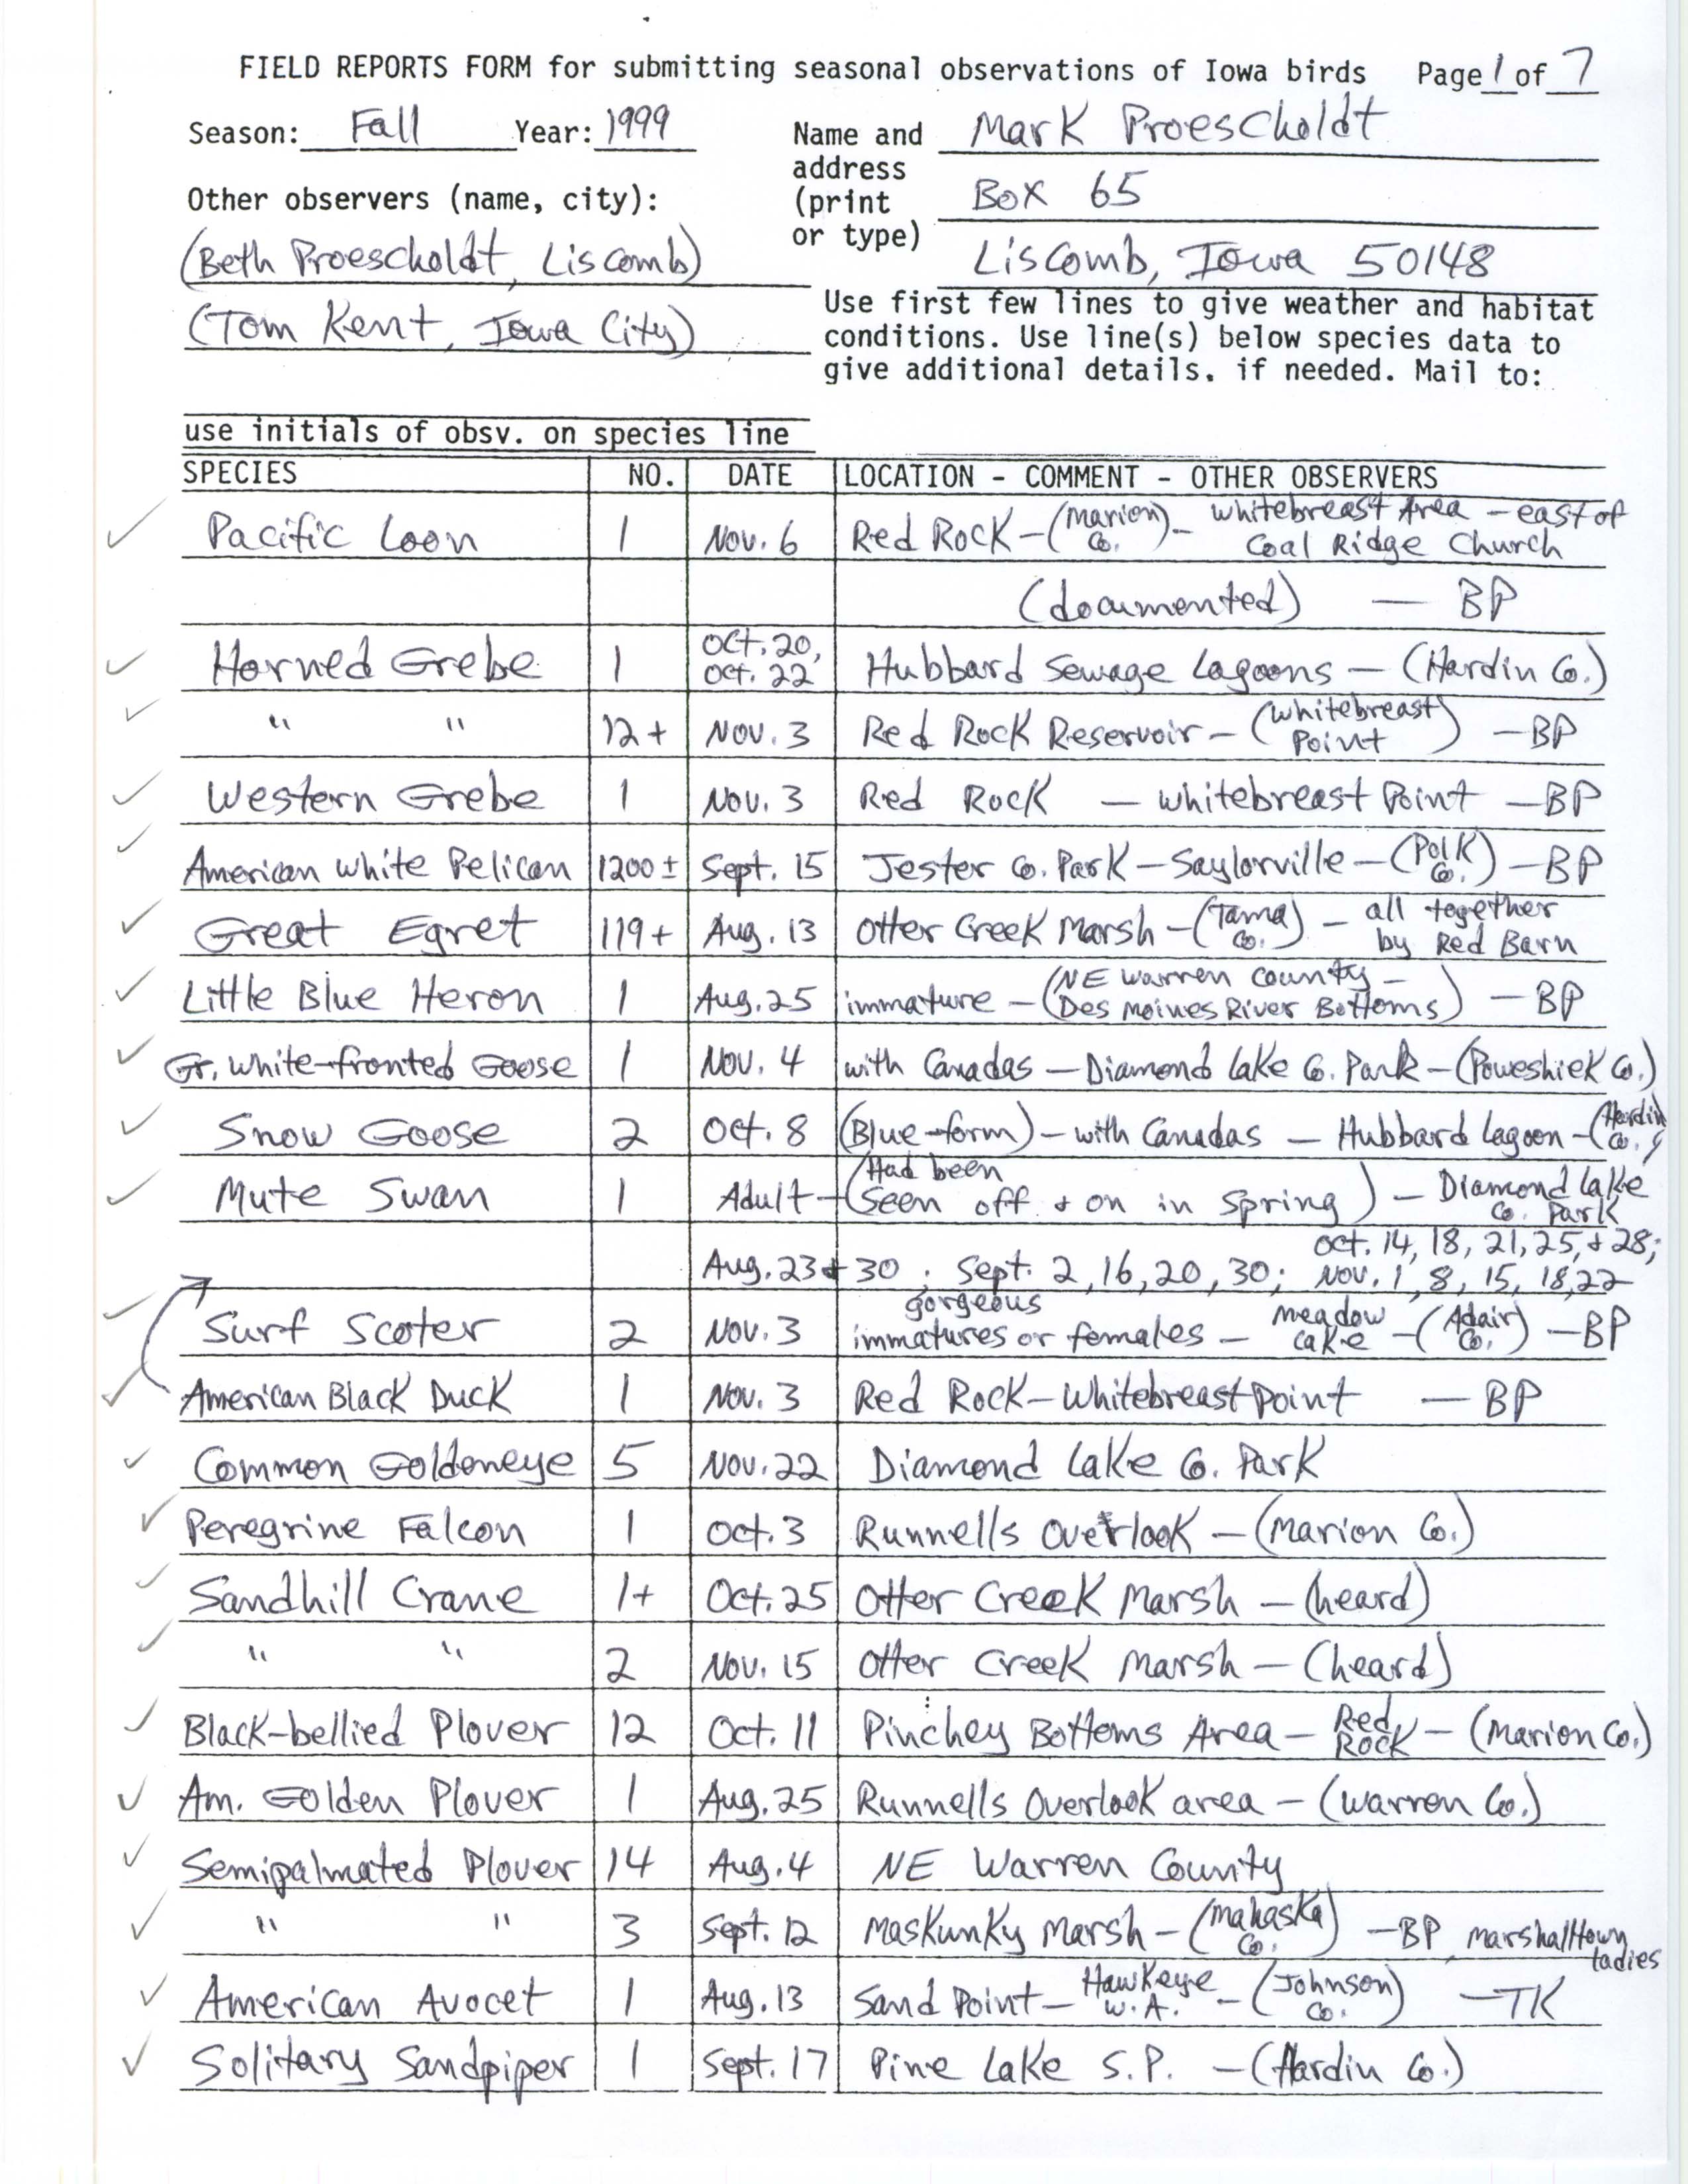 Field reports form for submitting seasonal observations of Iowa birds, fall 1999, Mark Proescholdt